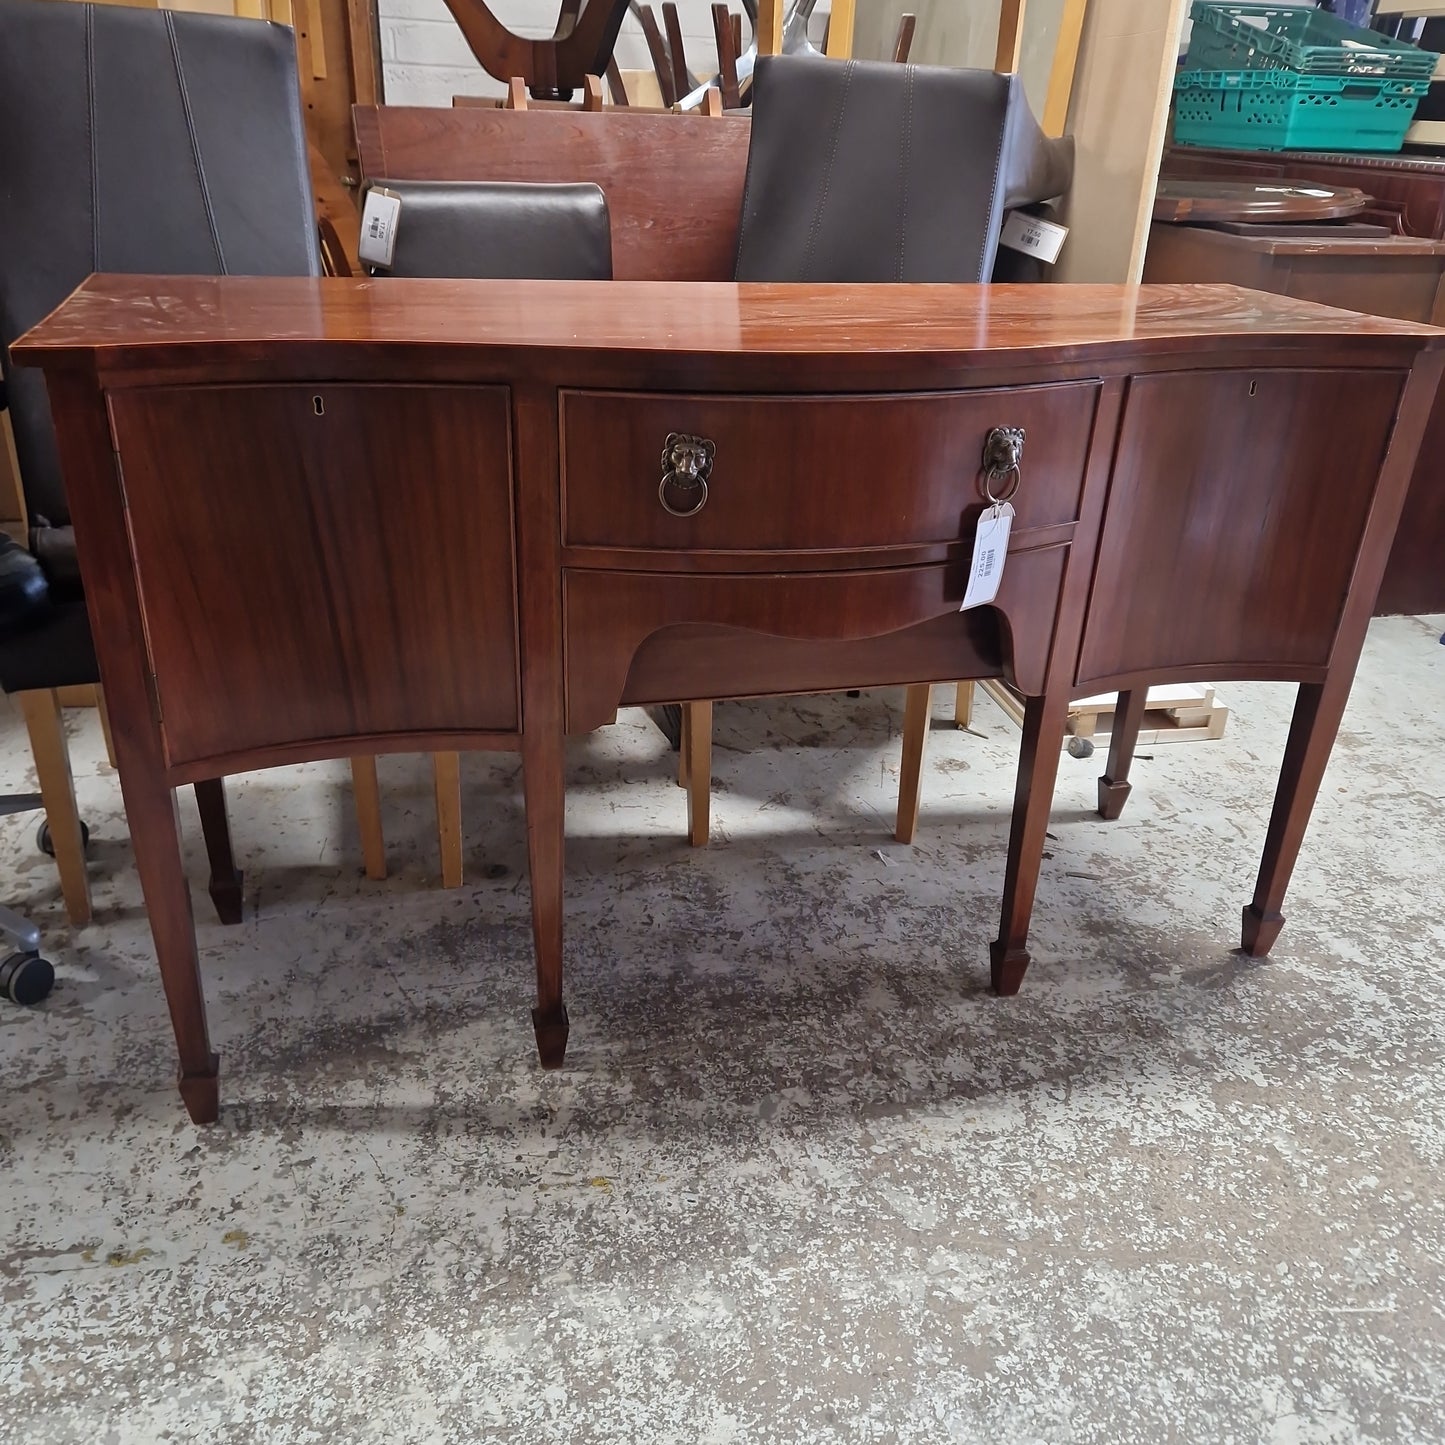 Mahogany 2 door 1 drawer bow fronted sideboard 